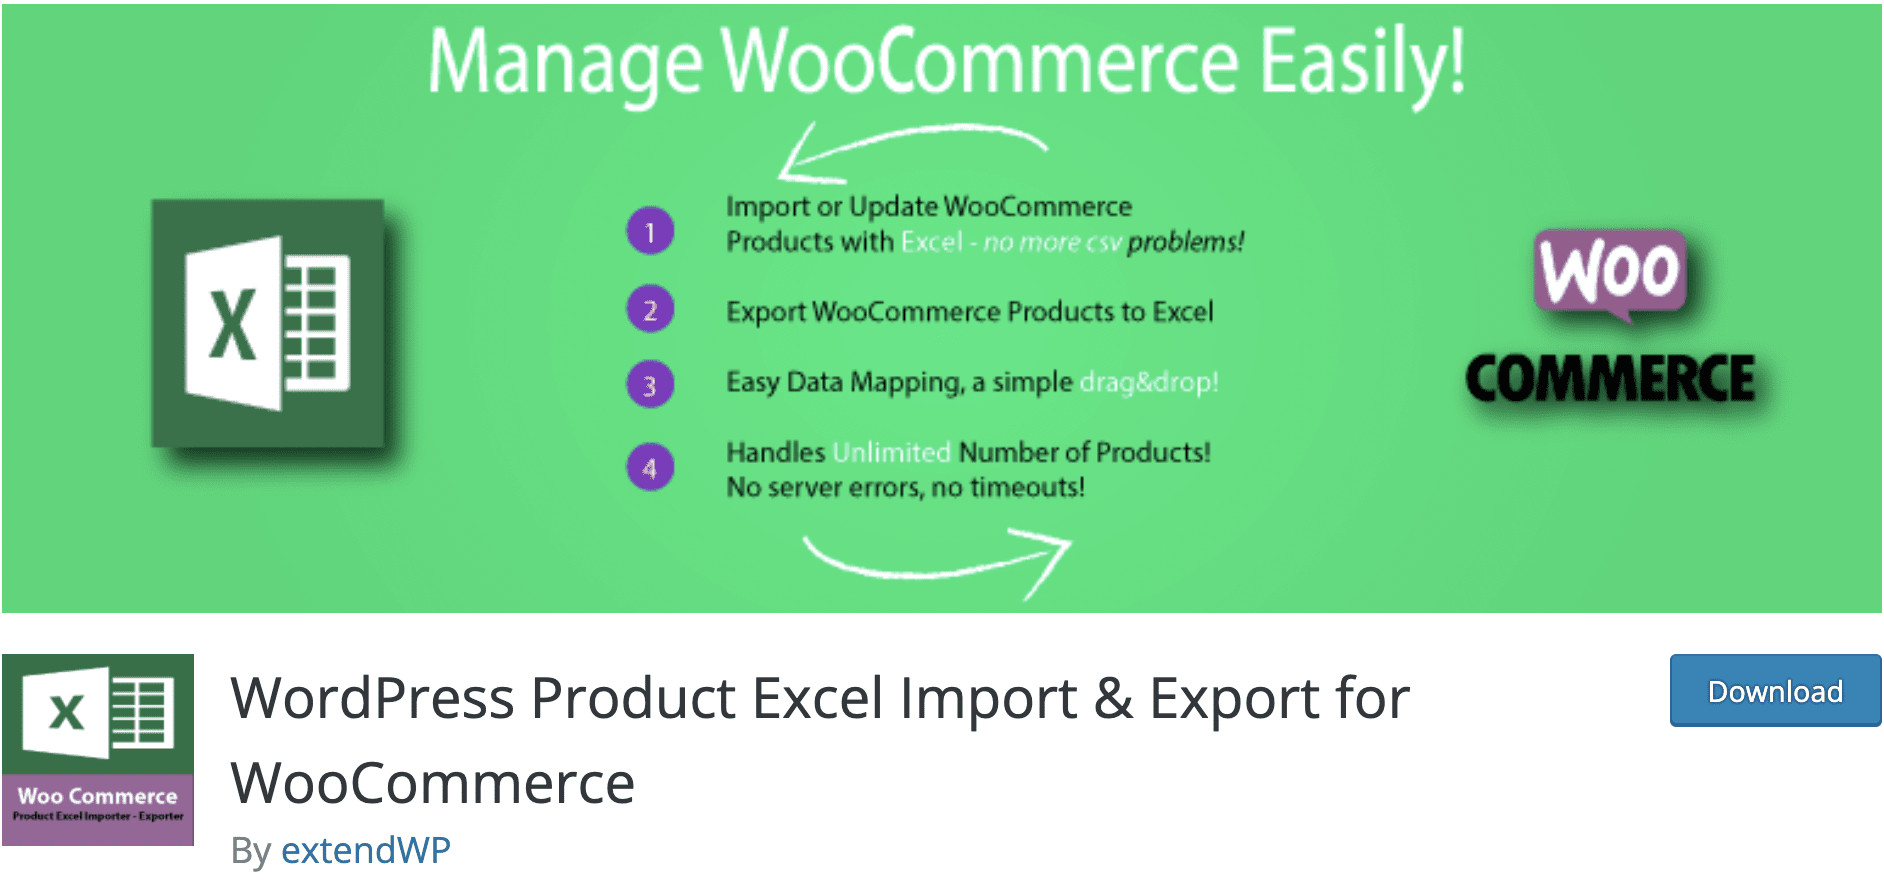 WordPress Product Excel Import & Export for WooCommerce